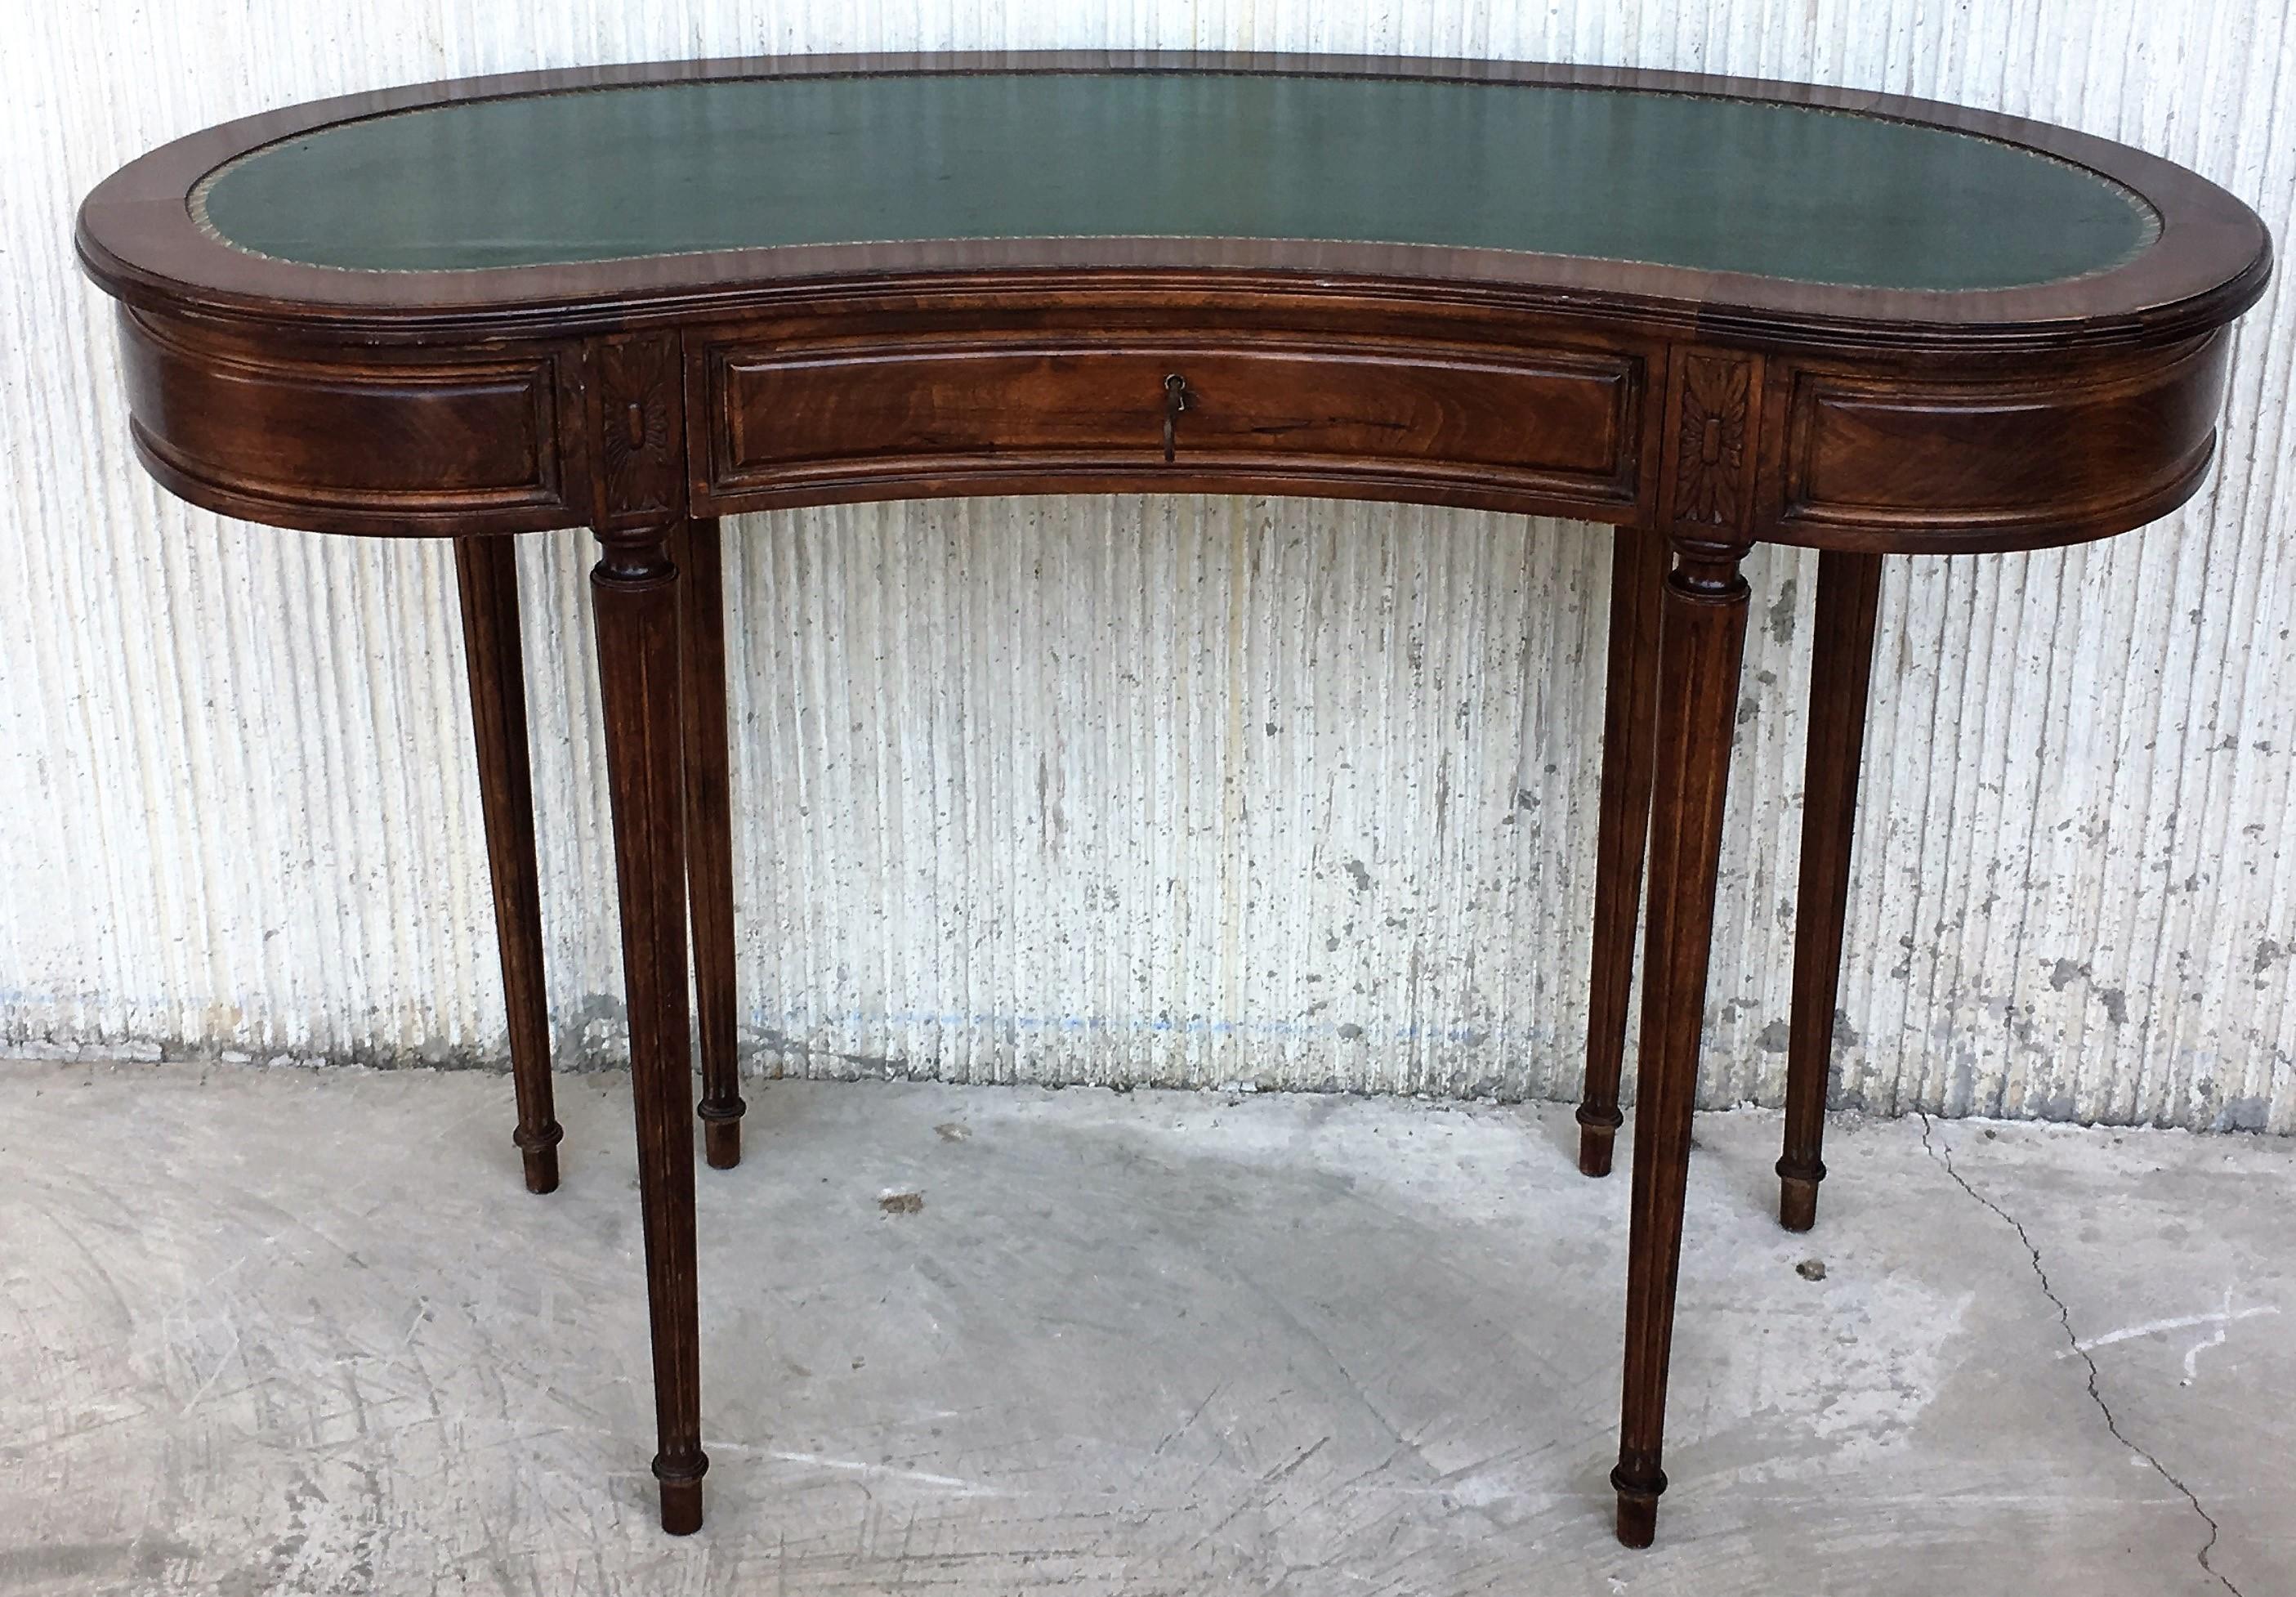 French Fine Quality Coromandel and Marquetry Inlaid Victorian Period Kidney Lady Desk